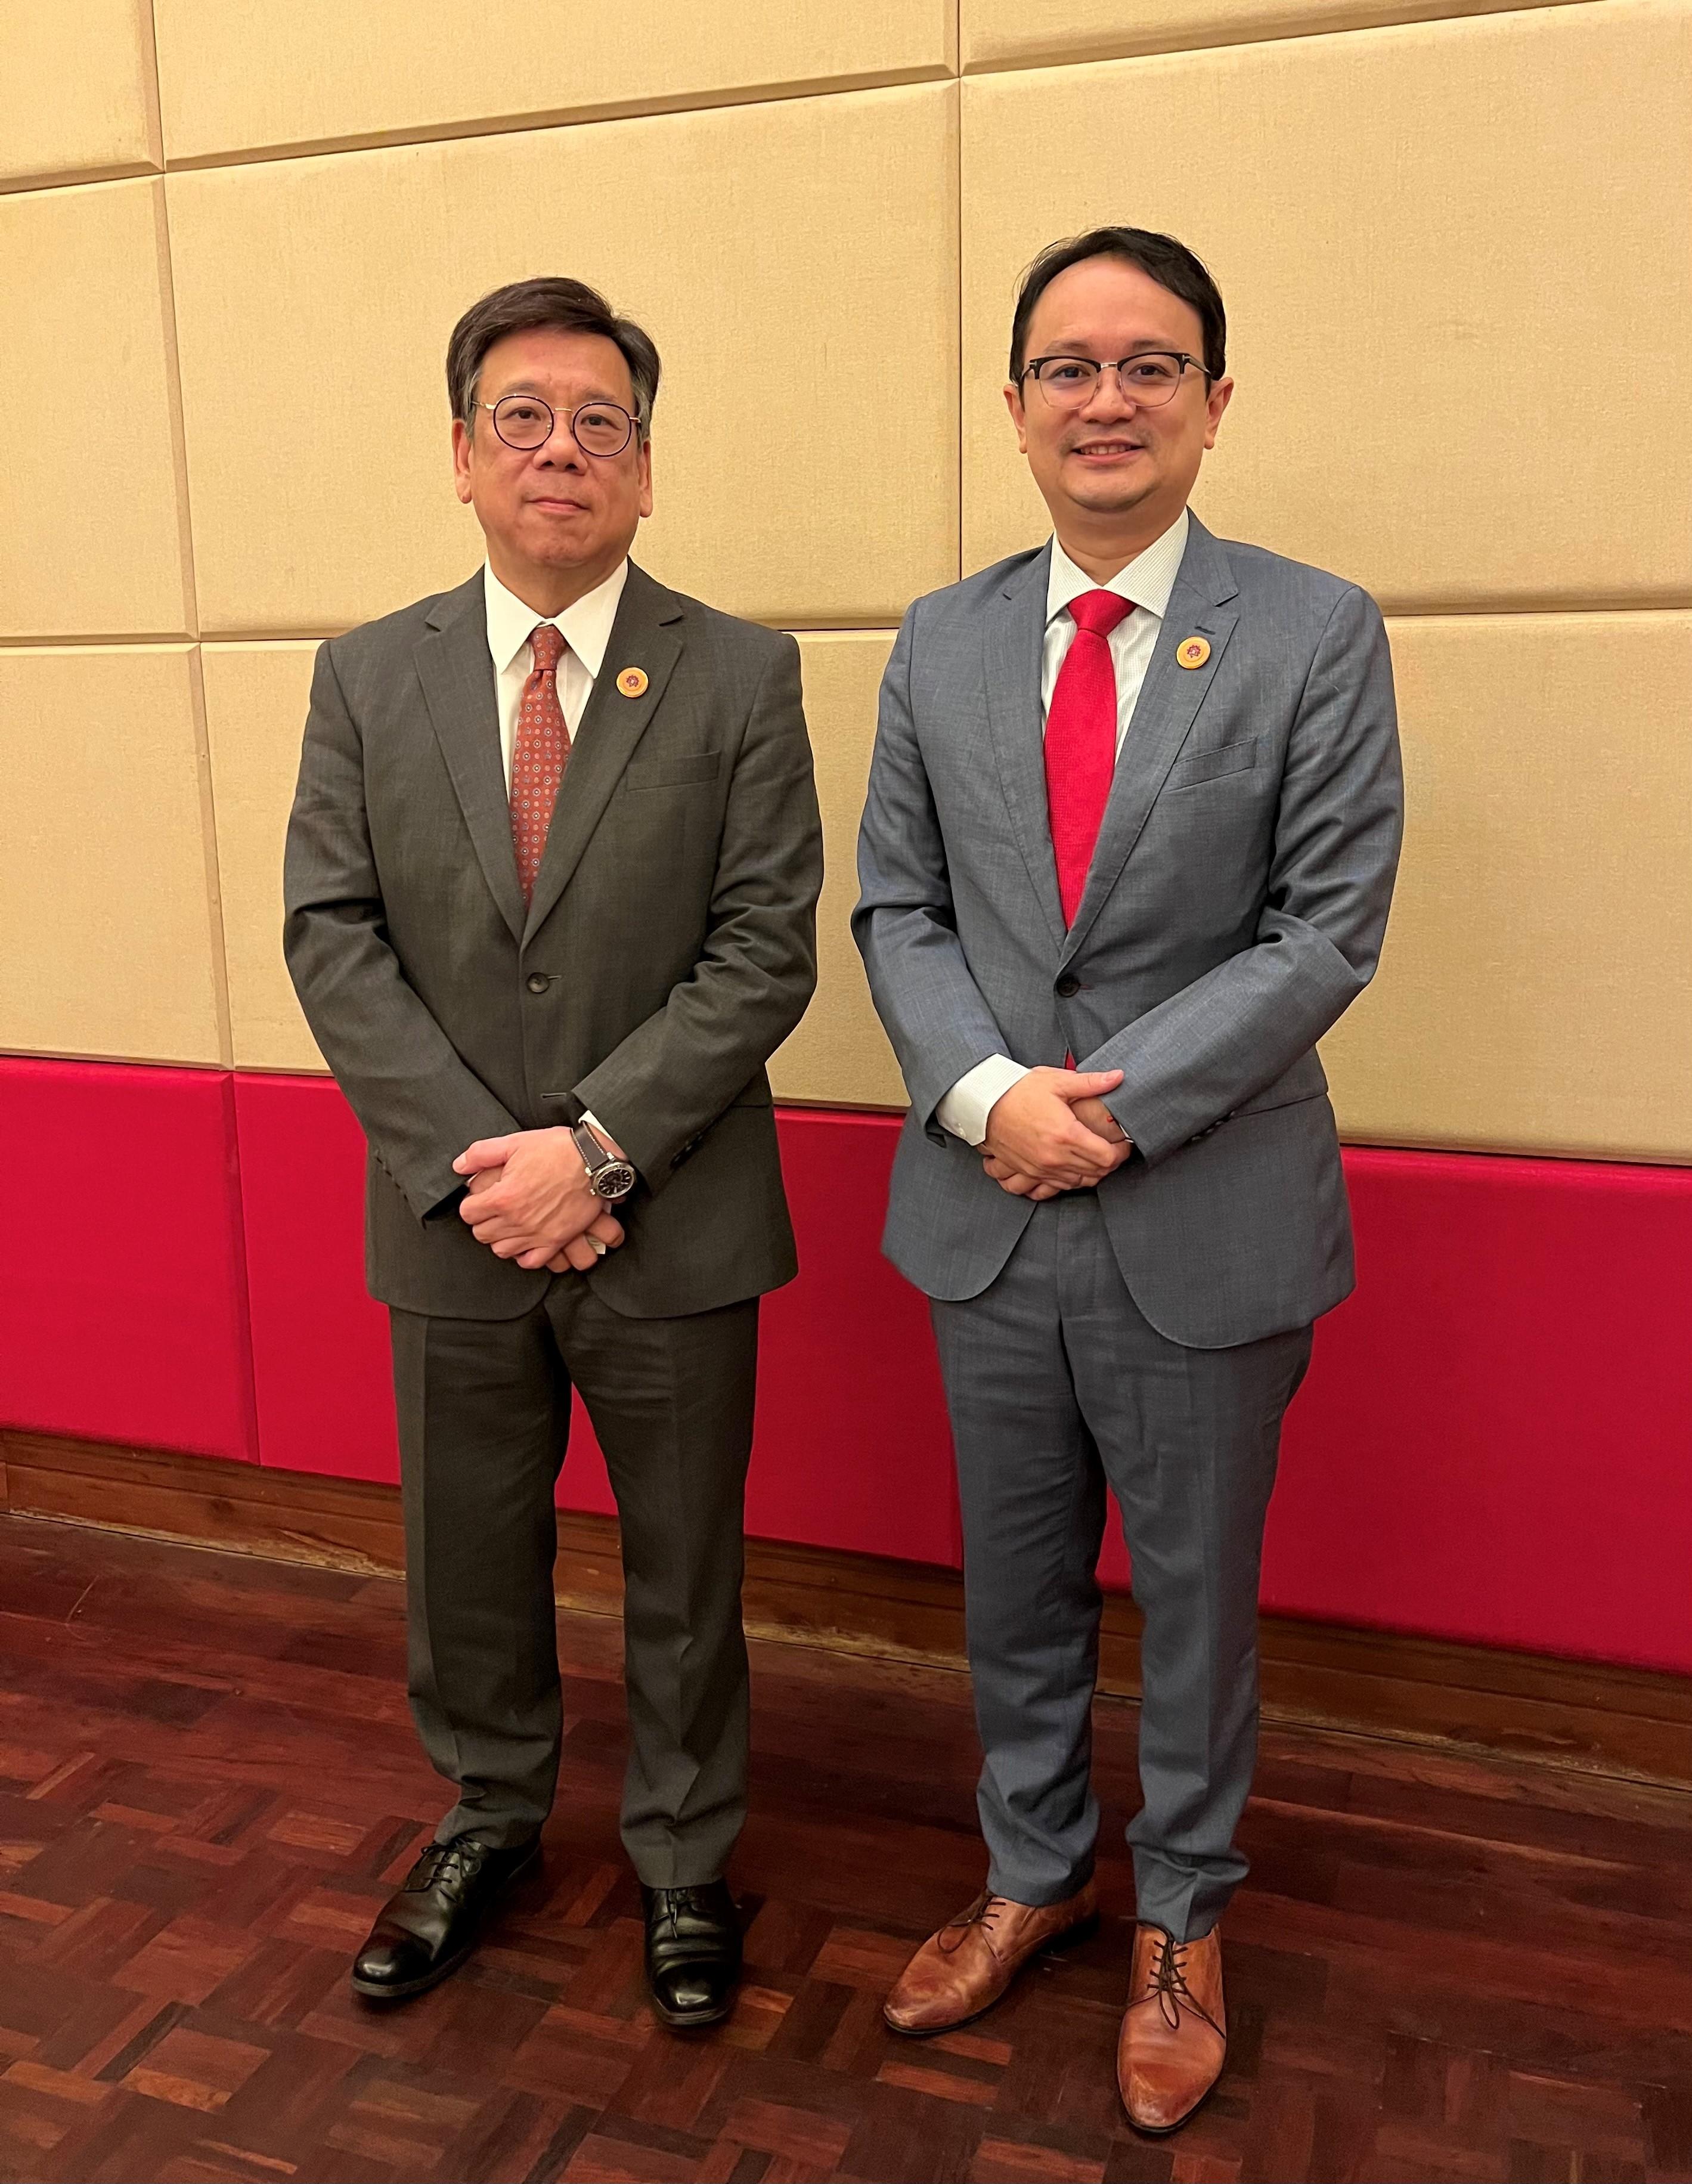 The Secretary for Commerce and Economic Development, Mr Algernon Yau (left), had a bilateral meeting with the Vice Minister of Trade of Indonesia, Dr Jerry Sambuaga (right), in Siem Reap, Cambodia, today (September 17) to exchange views on issues of mutual interest.